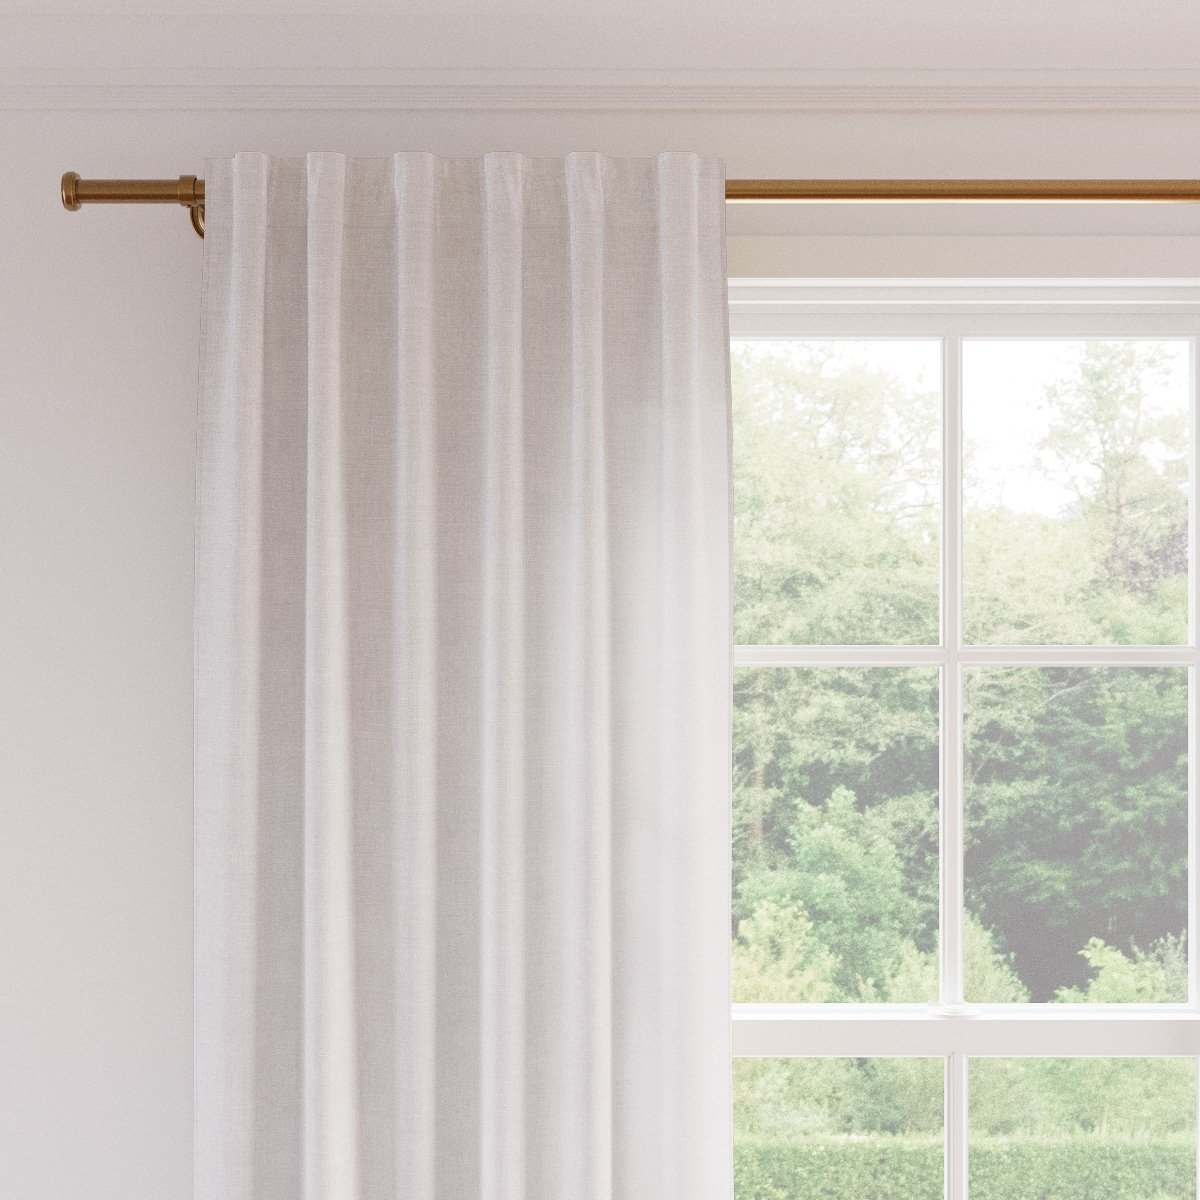 Linen Curtain, Optic White Linen, 50" x 96", Privacy - Image 1